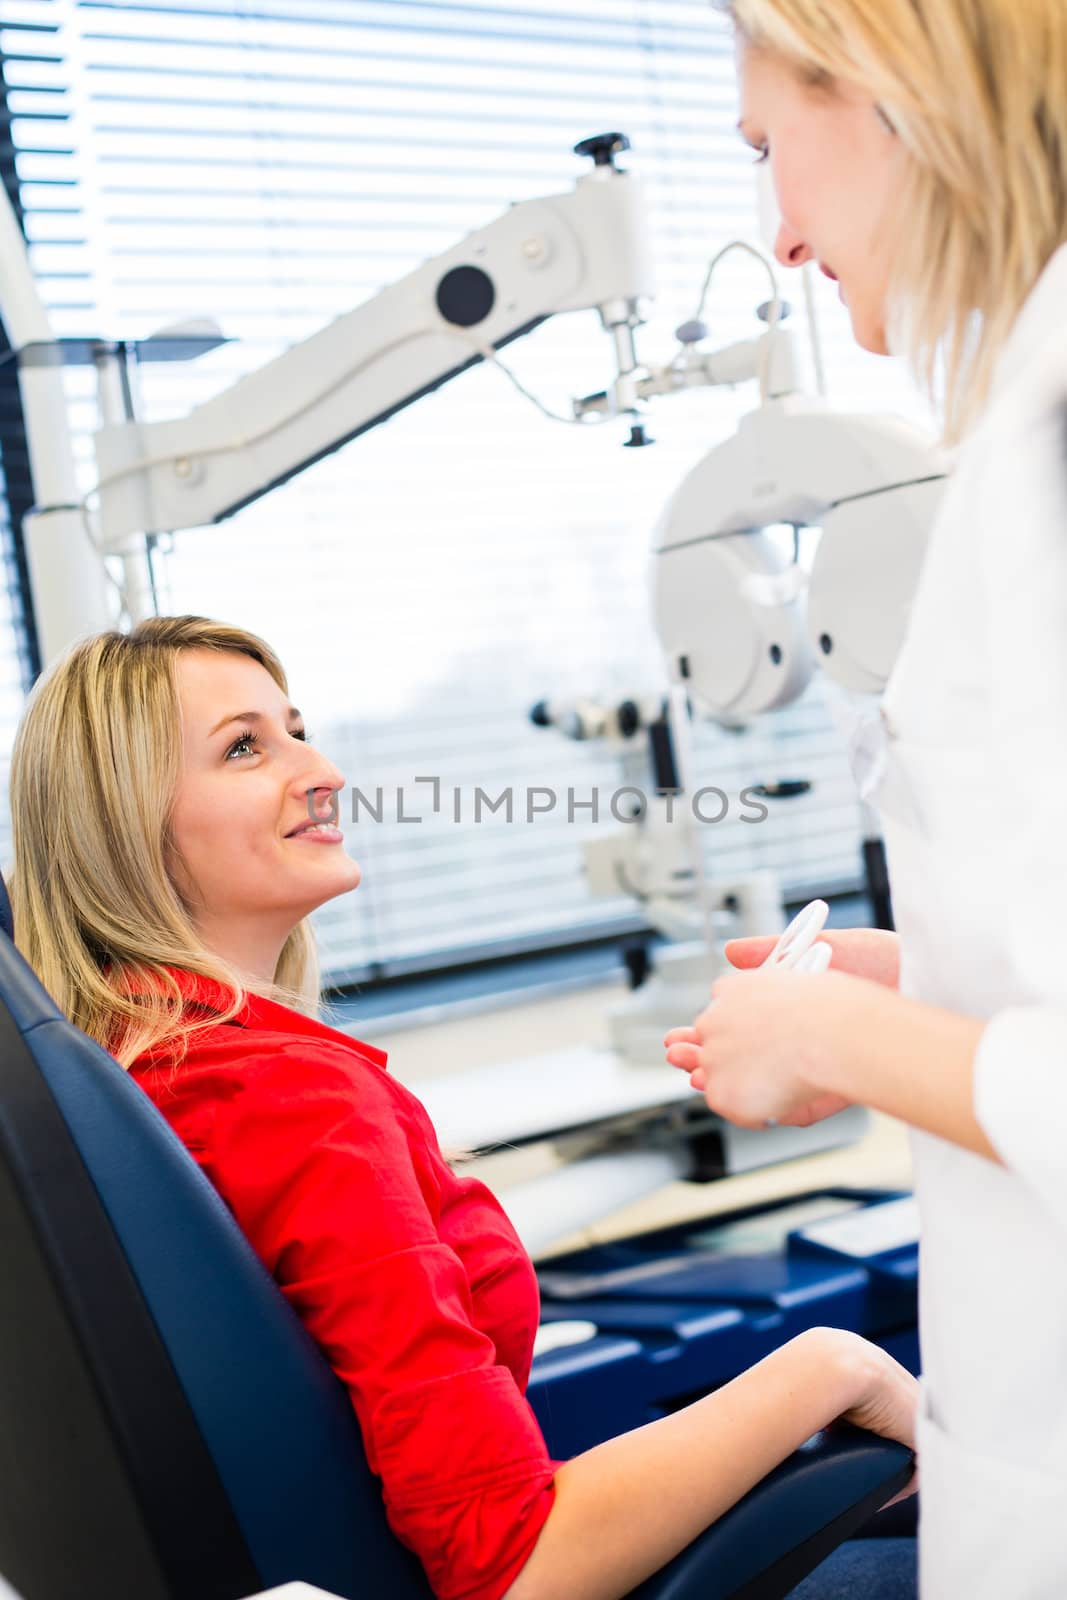 Optometry concept - pretty young woman having her eyes examined  by viktor_cap